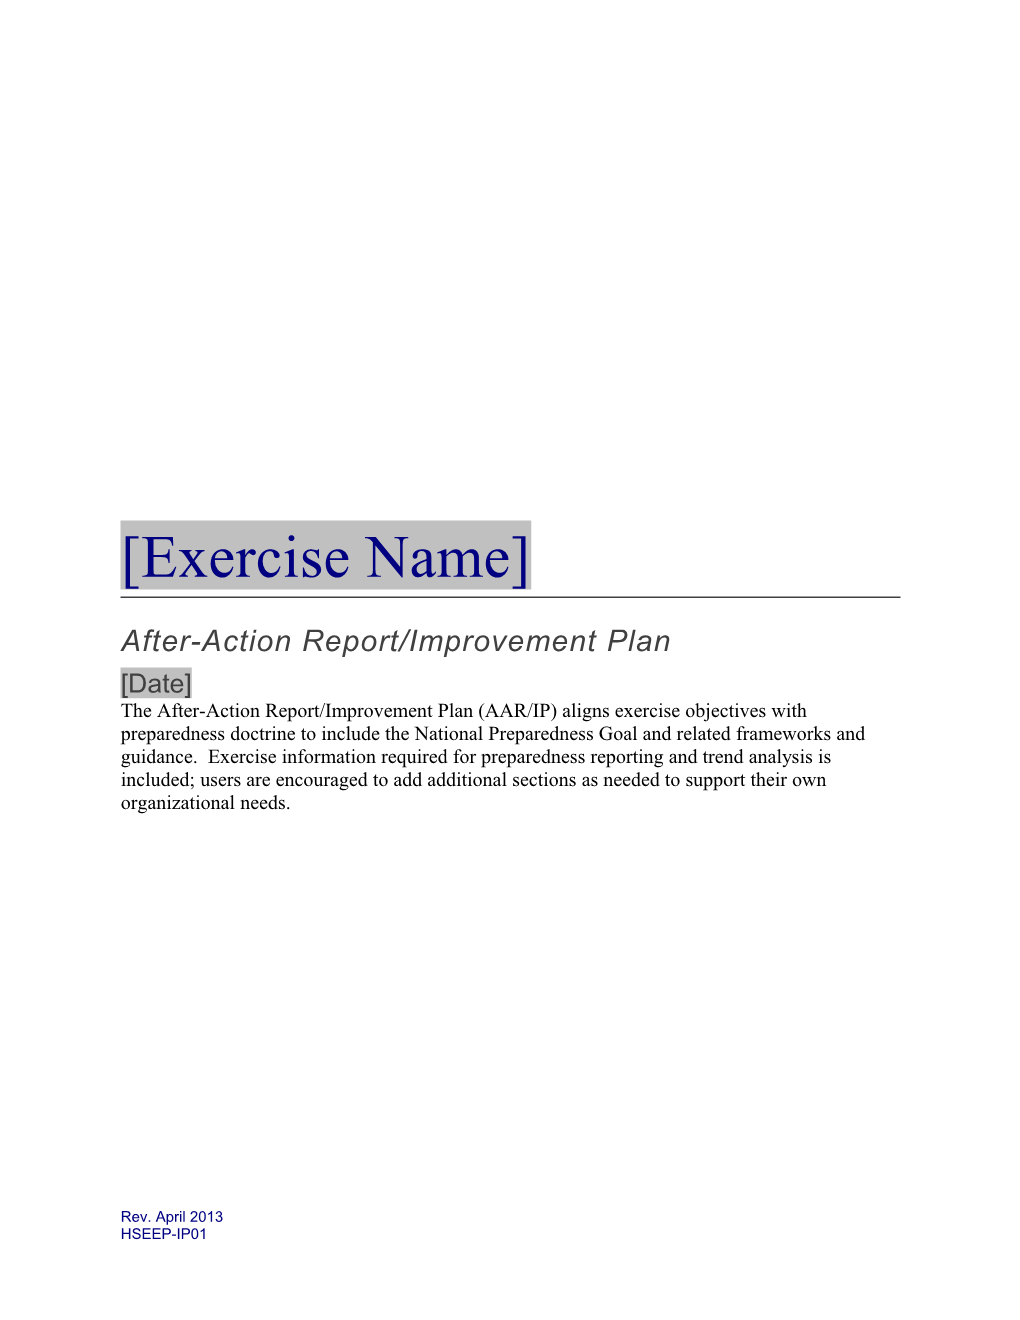 After-Action Report/Improvement Plan Template